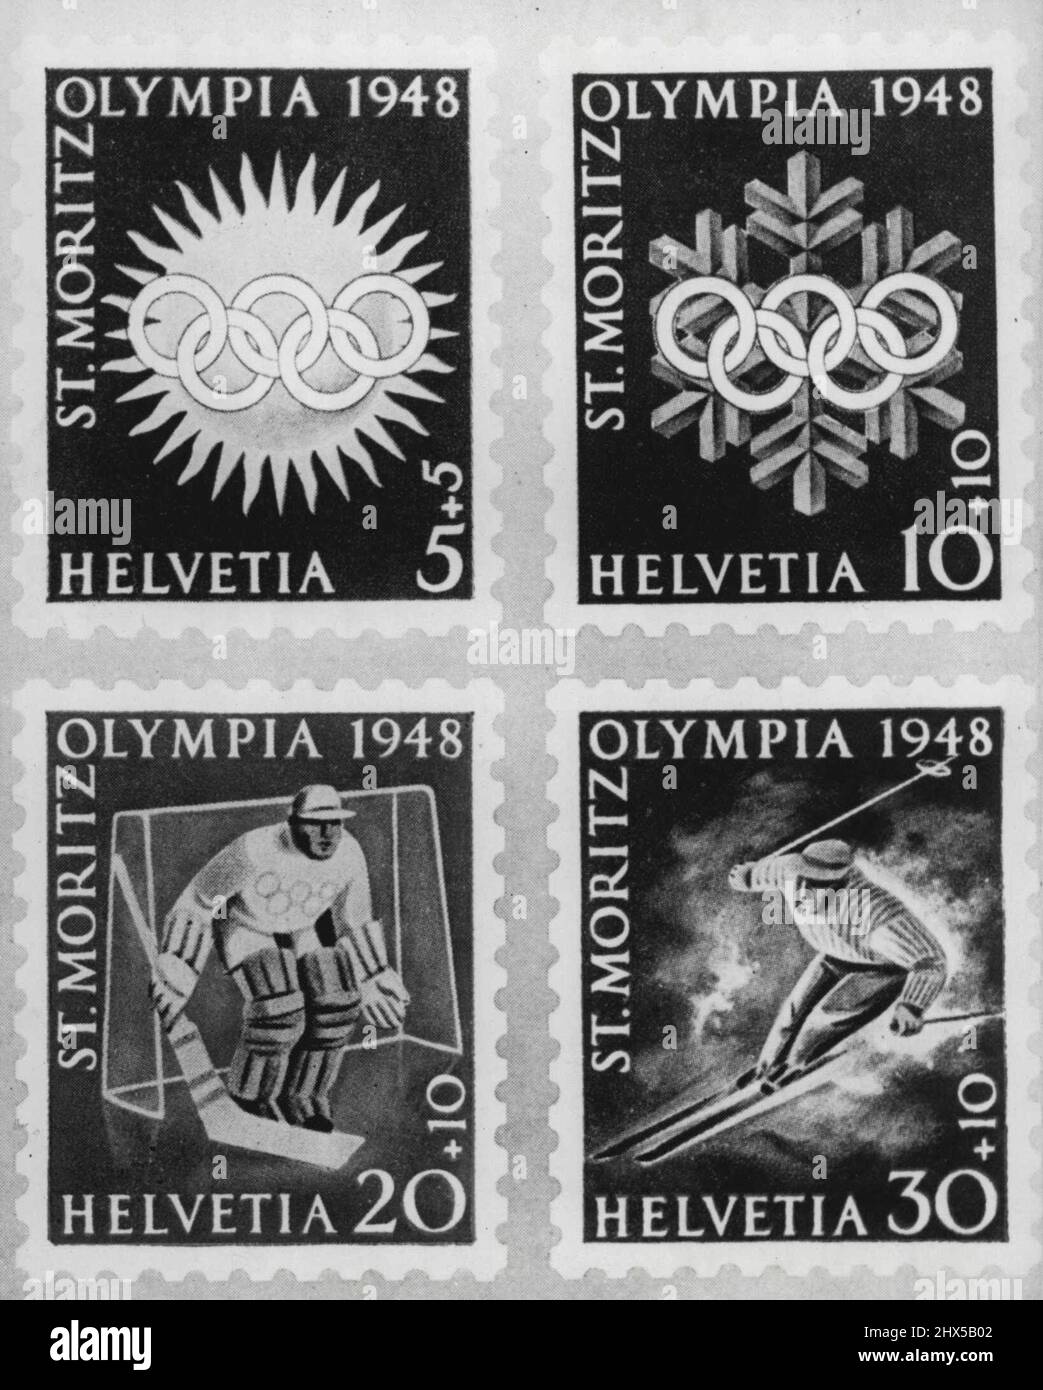 Swiss Stamps To pay Olympic Costs - The four new Swiss Olympic stamps, which will be in use as from today. The amount of surtax on each is shown as plus to the original cost. The Swiss Government, which has guaranteed a sum of 350,000 Swiss francs to meet the cost of the ten days' Olympic winter Games at St. Moritz, have issued a series of four special Olympic stamps of 5, 10, 20 and 30 centimes, each with a surtax, the sales of which are expected to defray half of the guaranteed amount. Januray 15, 1948. (Photo by Fox). Stock Photo